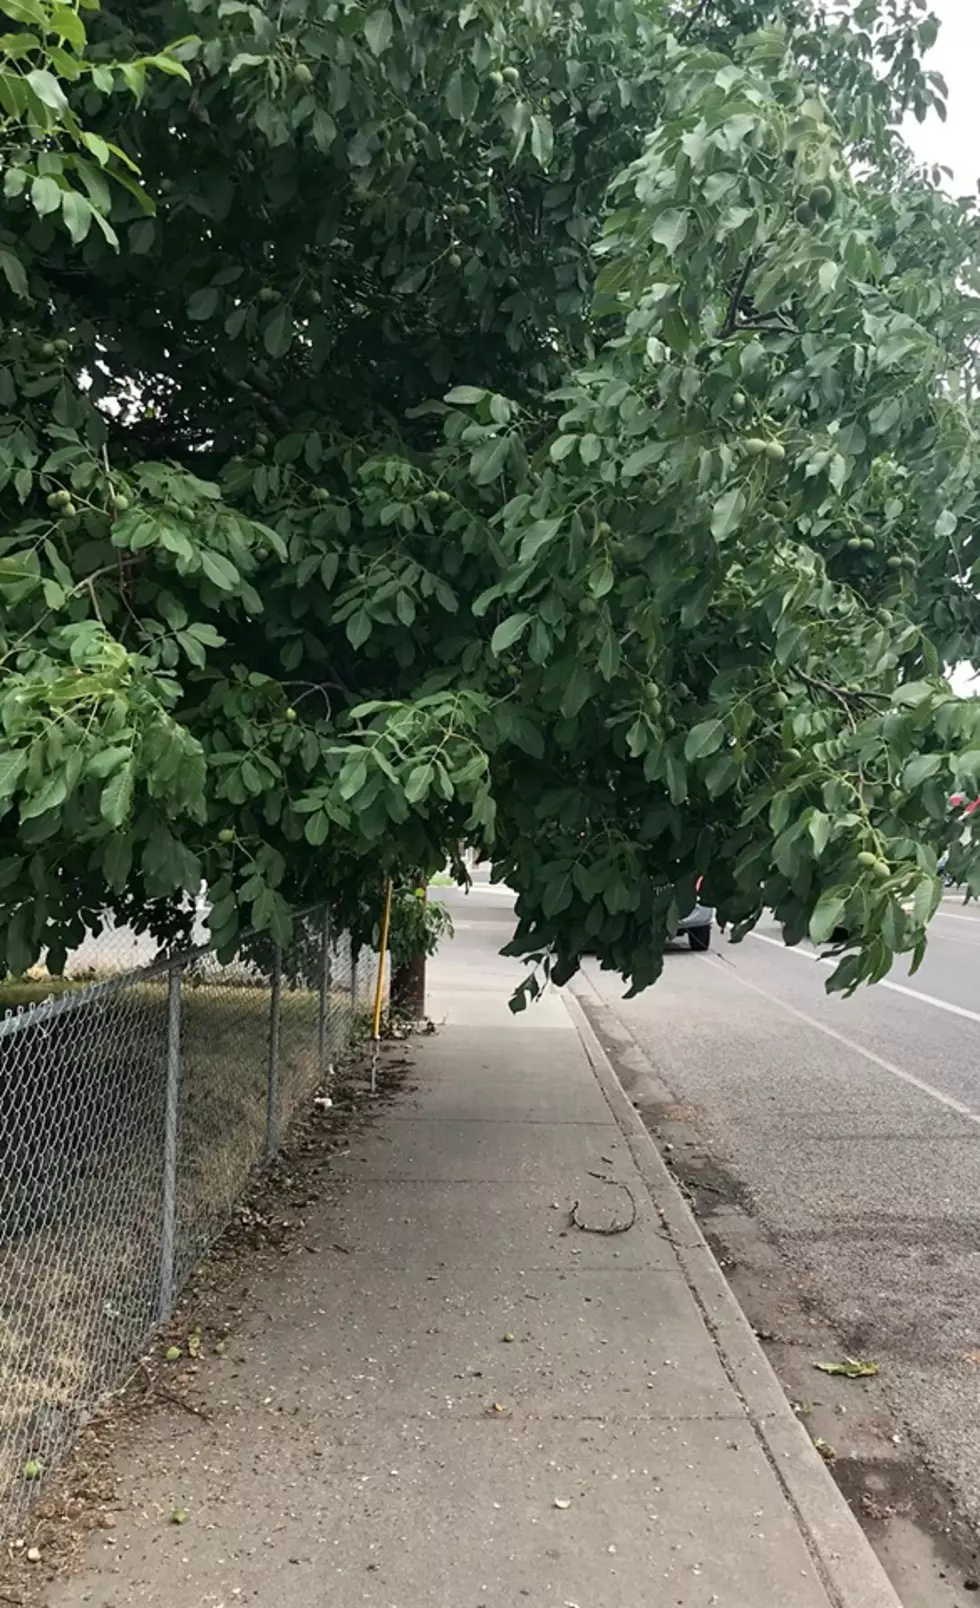 City Requests That Residents Trim Trees to Ensure Safety